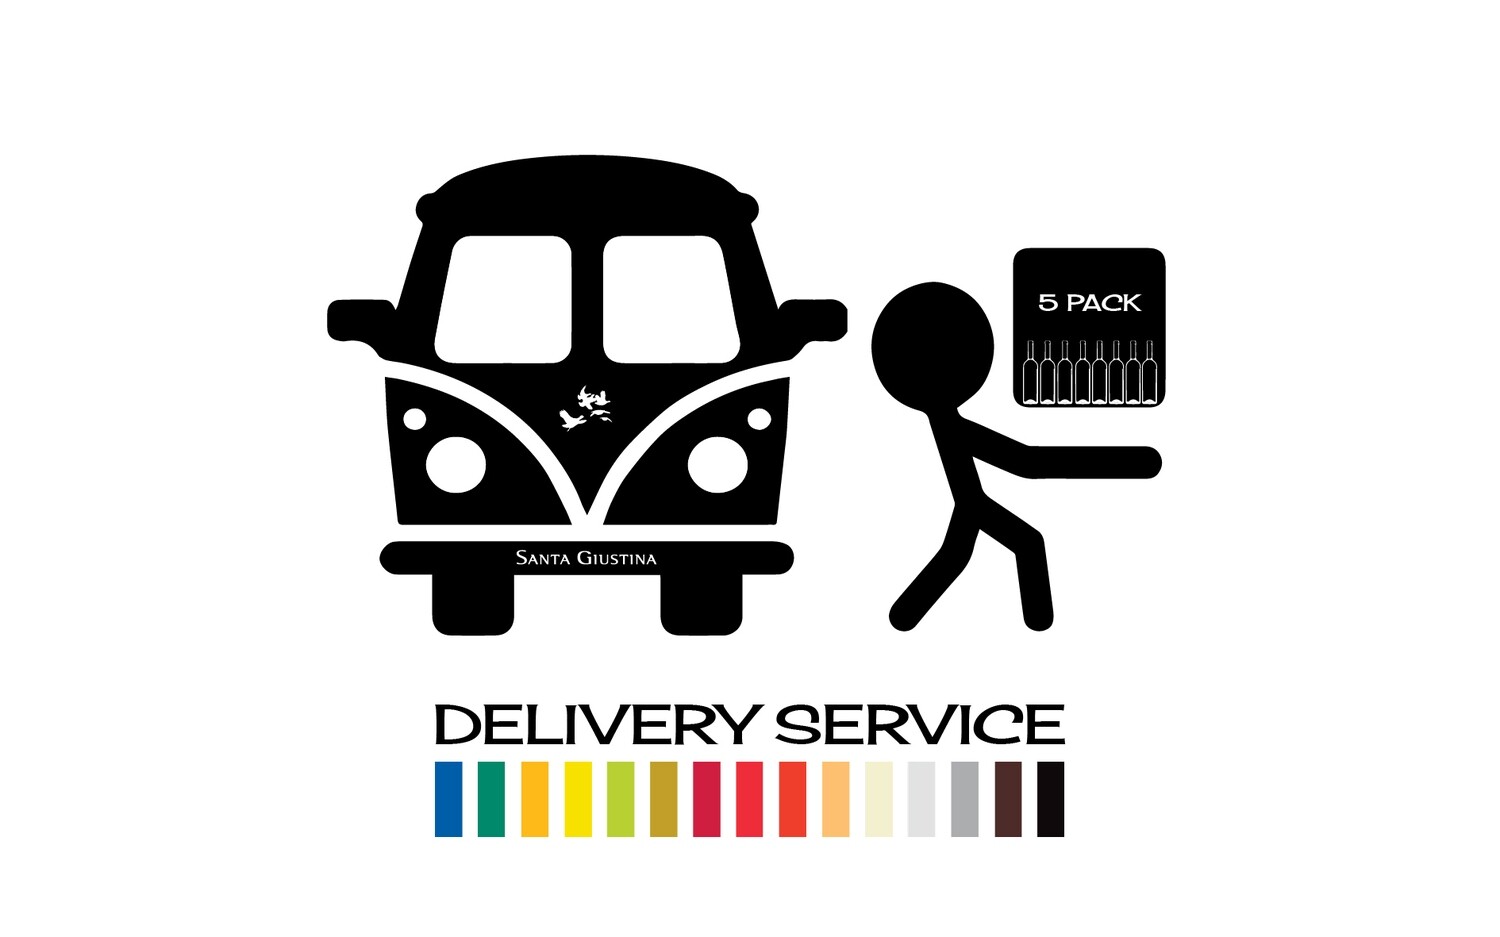 DELIVERY SERVICE 5-PACK